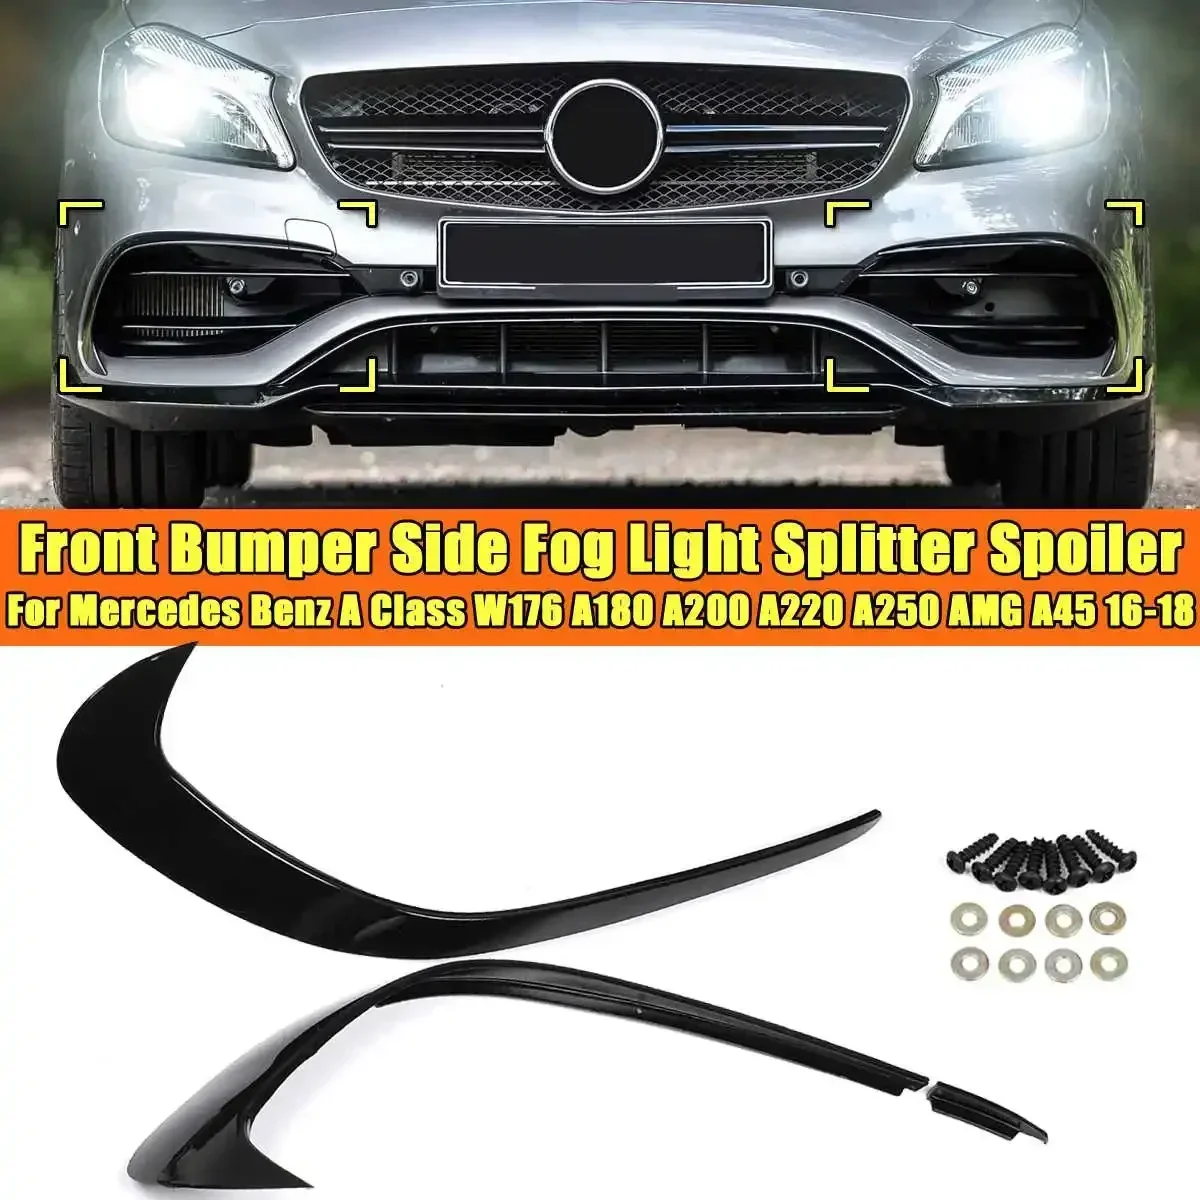 

Front Bumper Glossy Painted Side Fog Light Spoiler For Mercedes Benz A Class W176 A180 A200 A220 A250 AMG A45 2016-2018 Body Kit